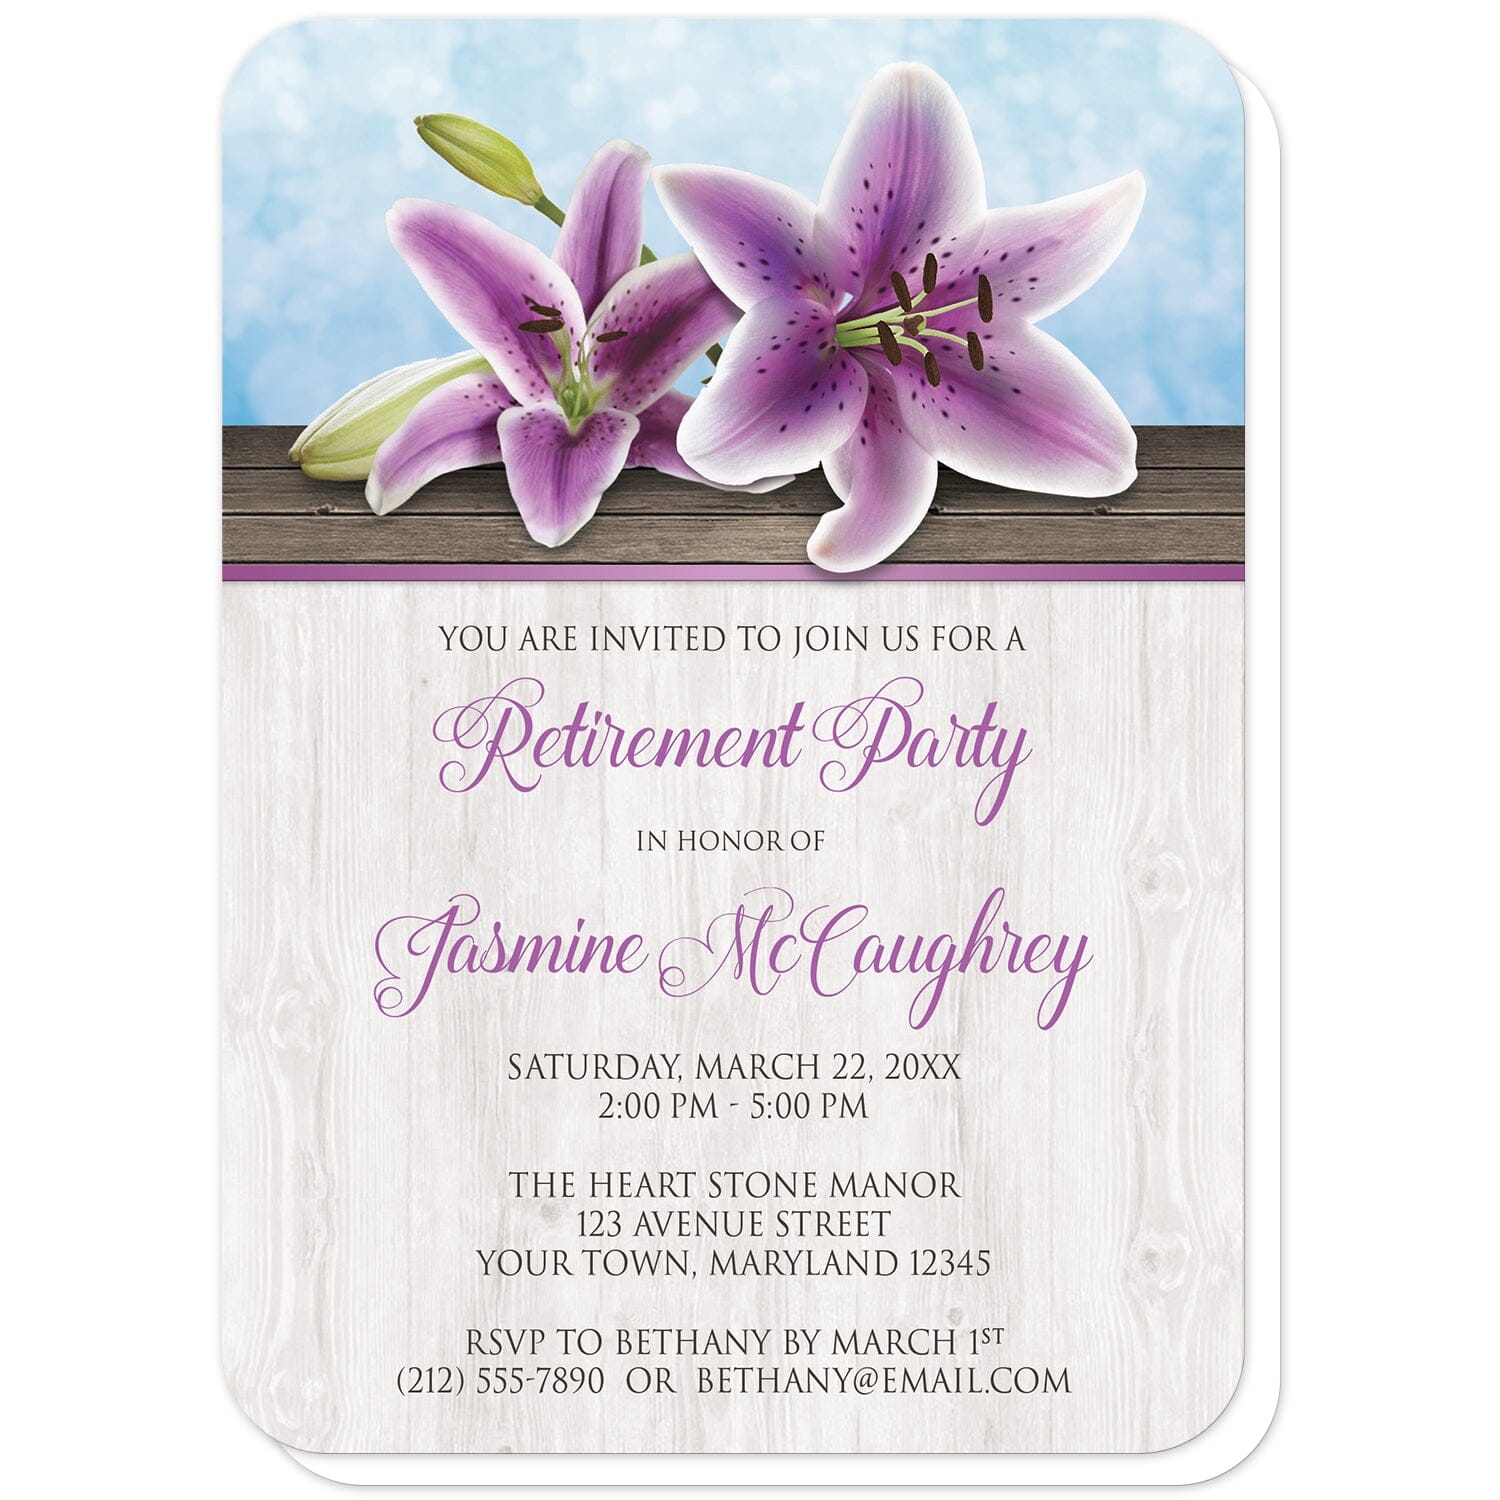 Pretty Floral Wood Purple Lily Retirement Invitations (with rounded corners) at Artistically Invited. Southern country-inspired pretty floral wood purple lily retirement invitations with two purple lilies on a light wood surface over a blue background design. Your personalized retirement party details are custom printed in purple and dark brown over the light wood pattern.